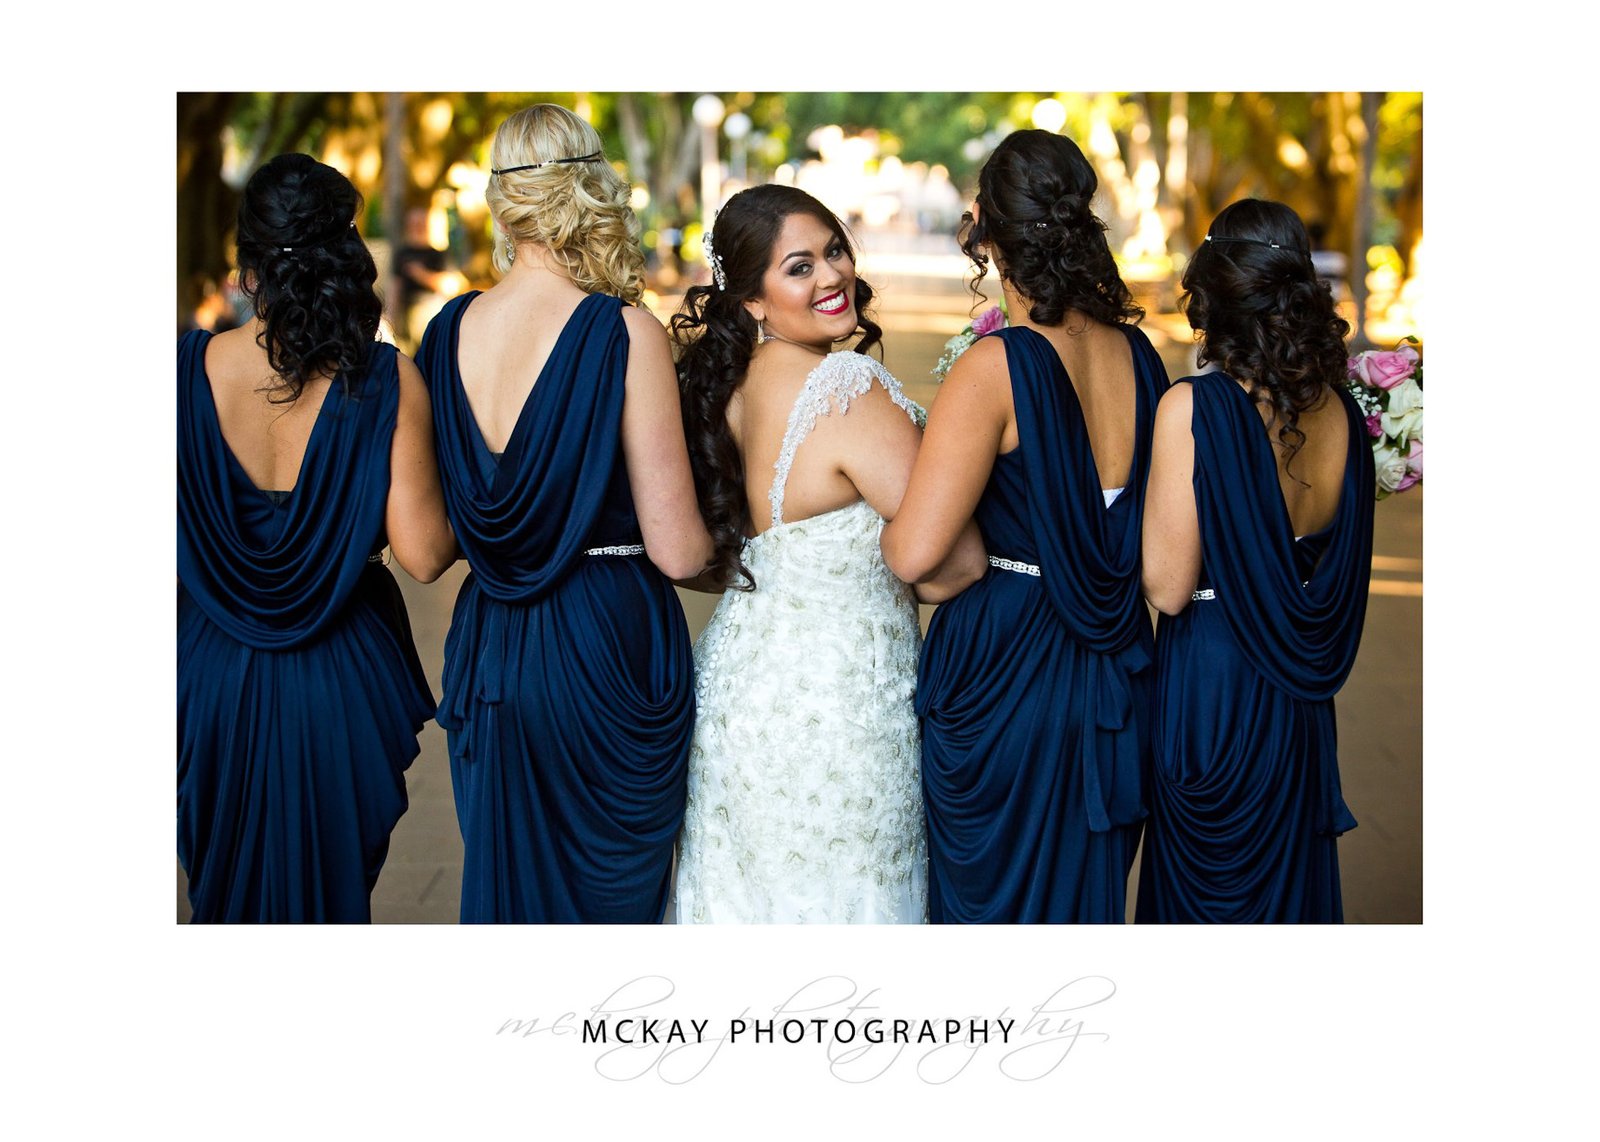 Nicole and her bridesmaids wearing blue backless dresses